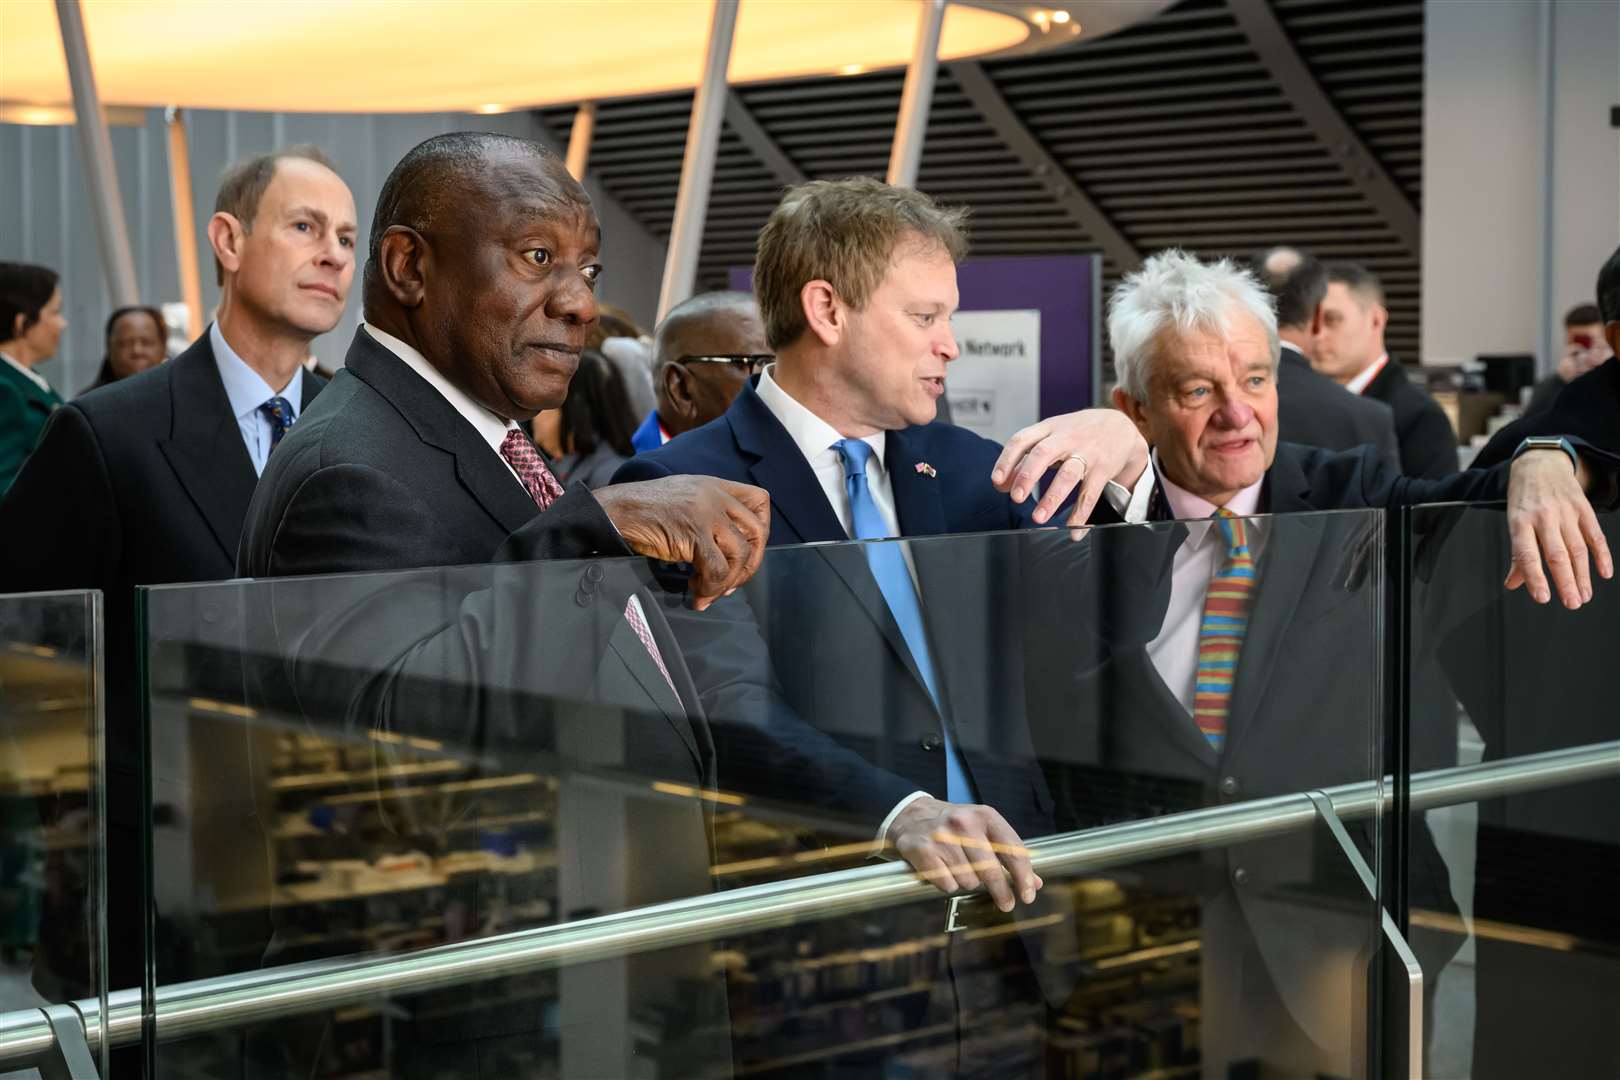 President Cyril Ramaphosa, Business Secretary Grant Shapps and director of the Francis Crick Institute Paul Nurse with the Earl of Wessex (back left) (Leon Neal/PA)